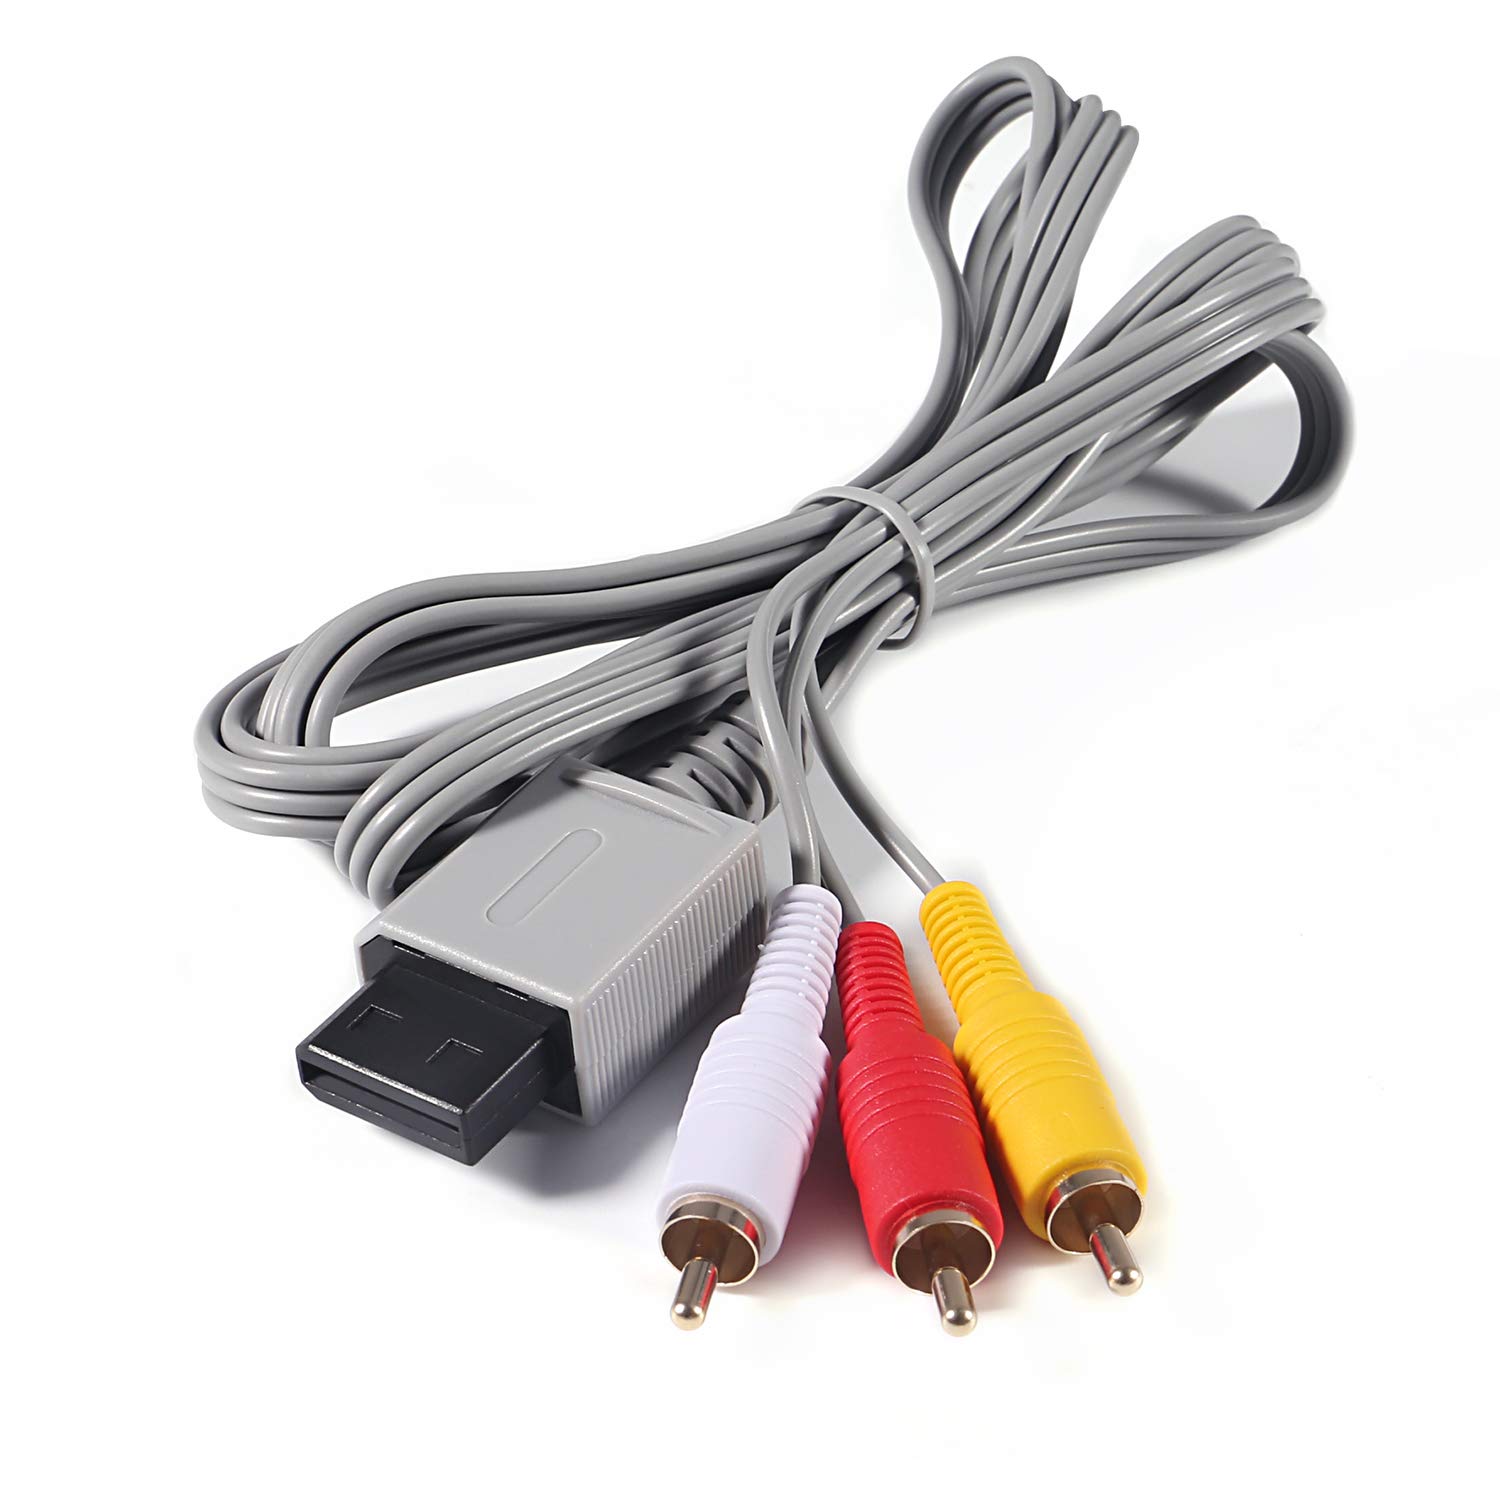 Aokin AV Cable for Wii Wii U, Audio Video AV Cable [...]